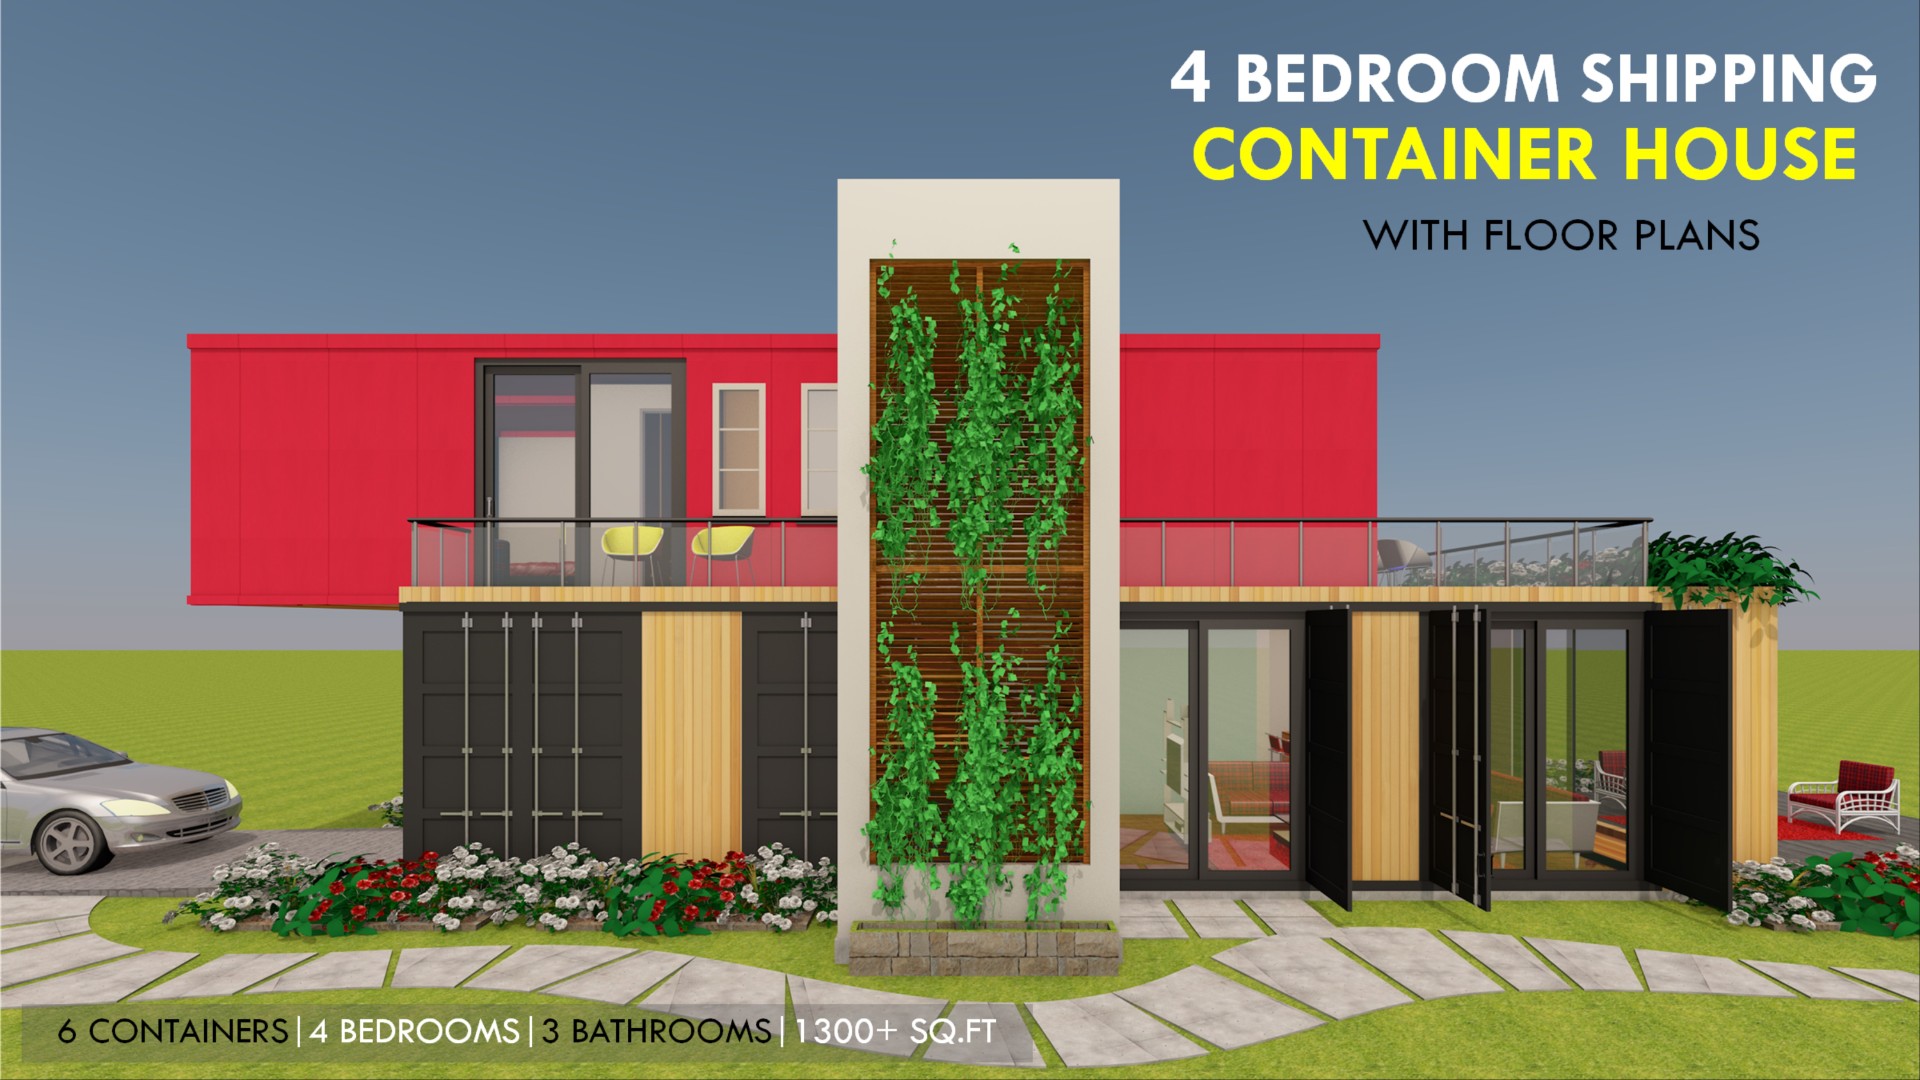 Modular Shipping Container 4 Bedroom Prefab Home Design with Floor Plans | MODBOX 1300